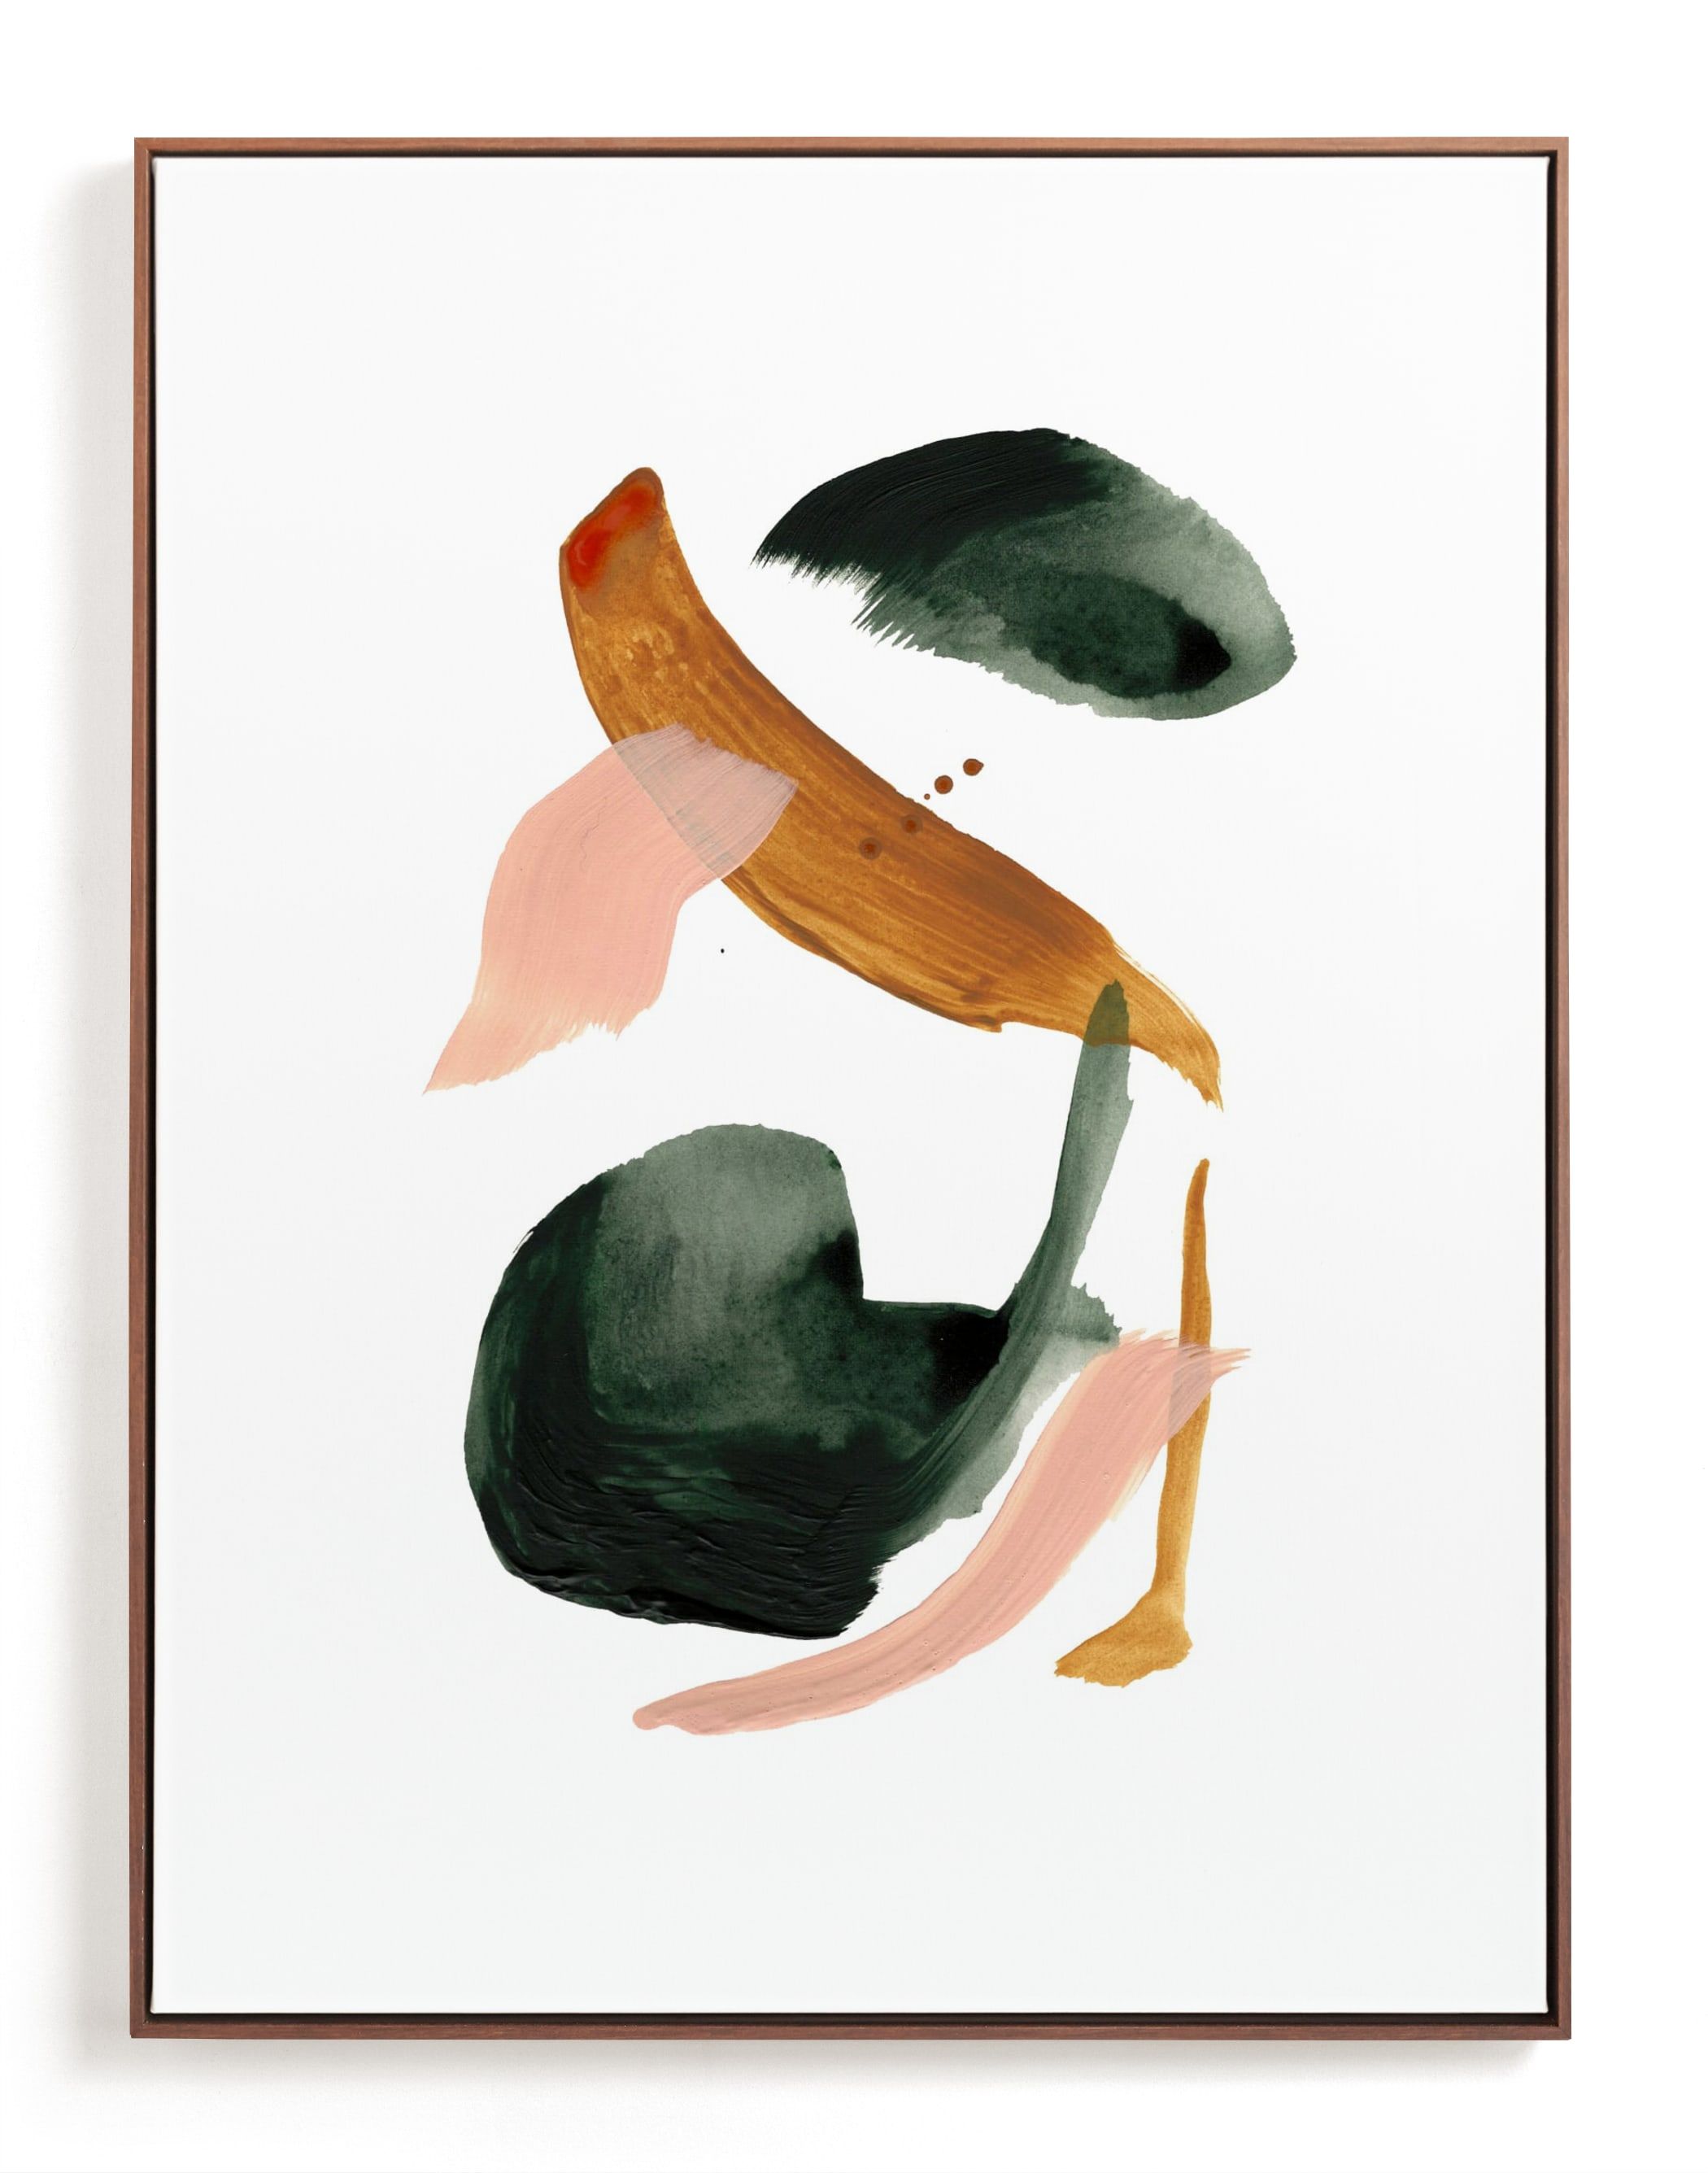 "Calm Forest No.18" - Painting Limited Edition Art Print by Cait Courneya. | Minted